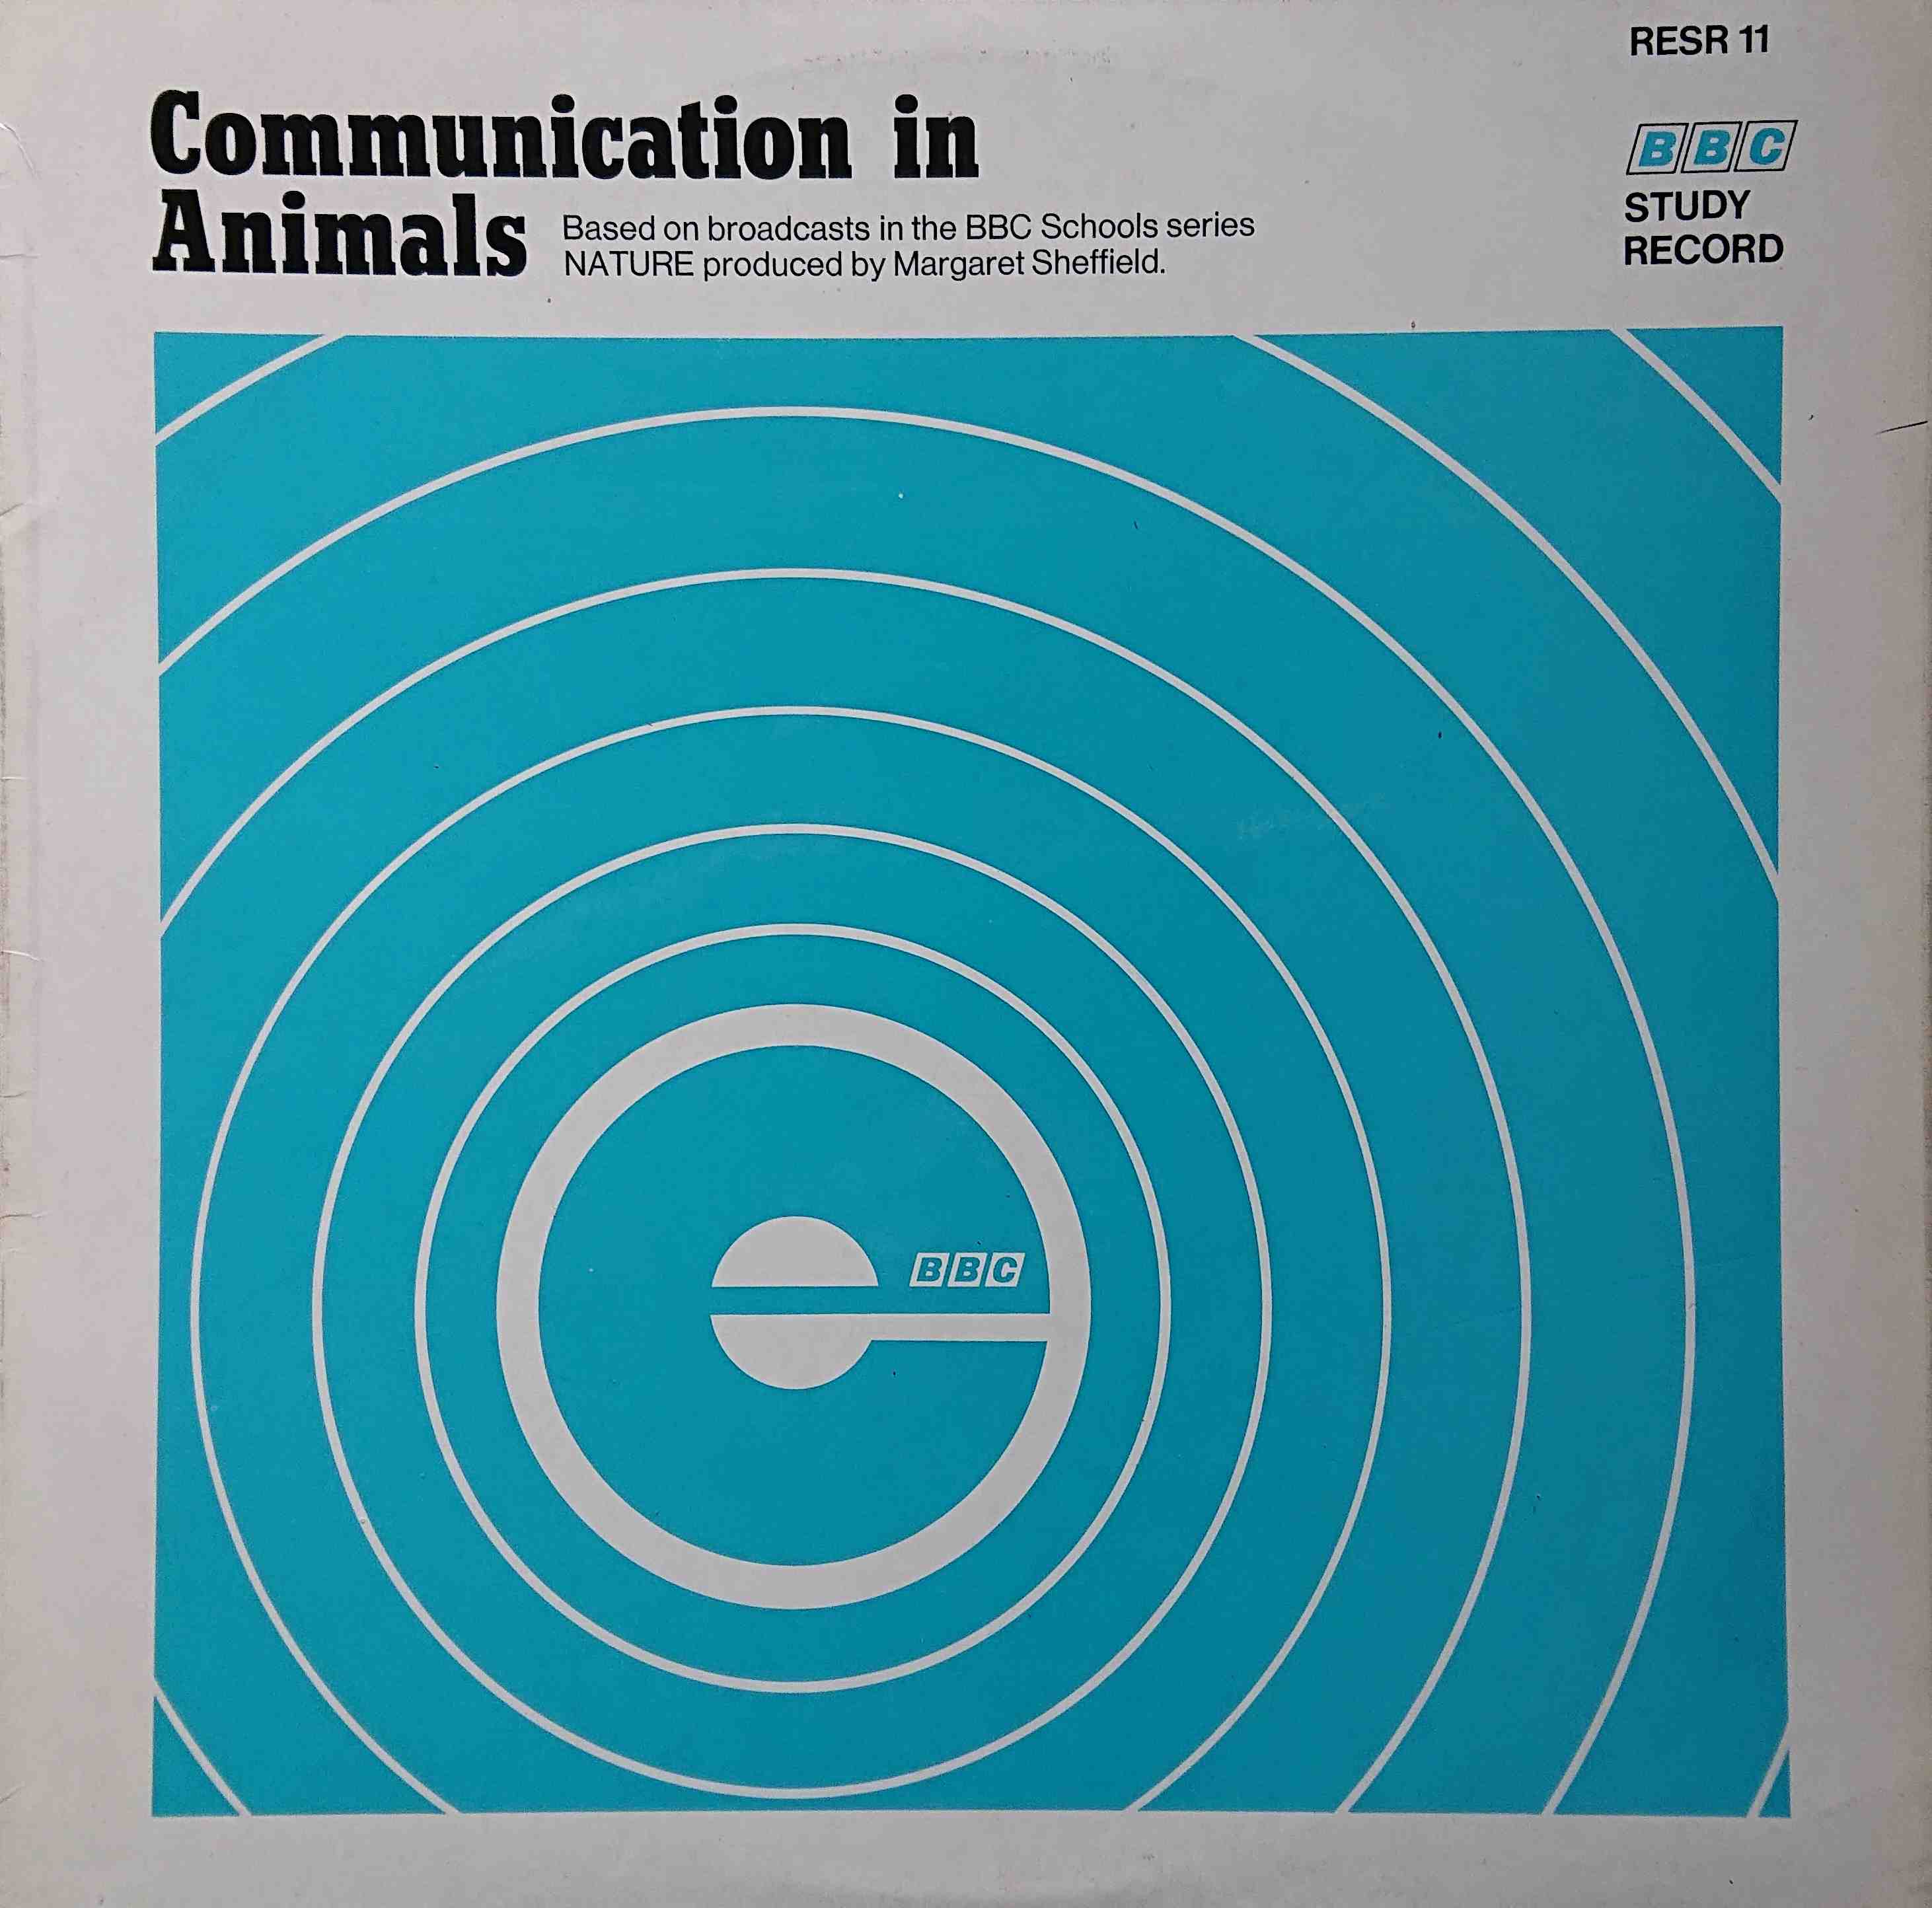 Picture of Communication in animals by artist Eric Simms from the BBC albums - Records and Tapes library